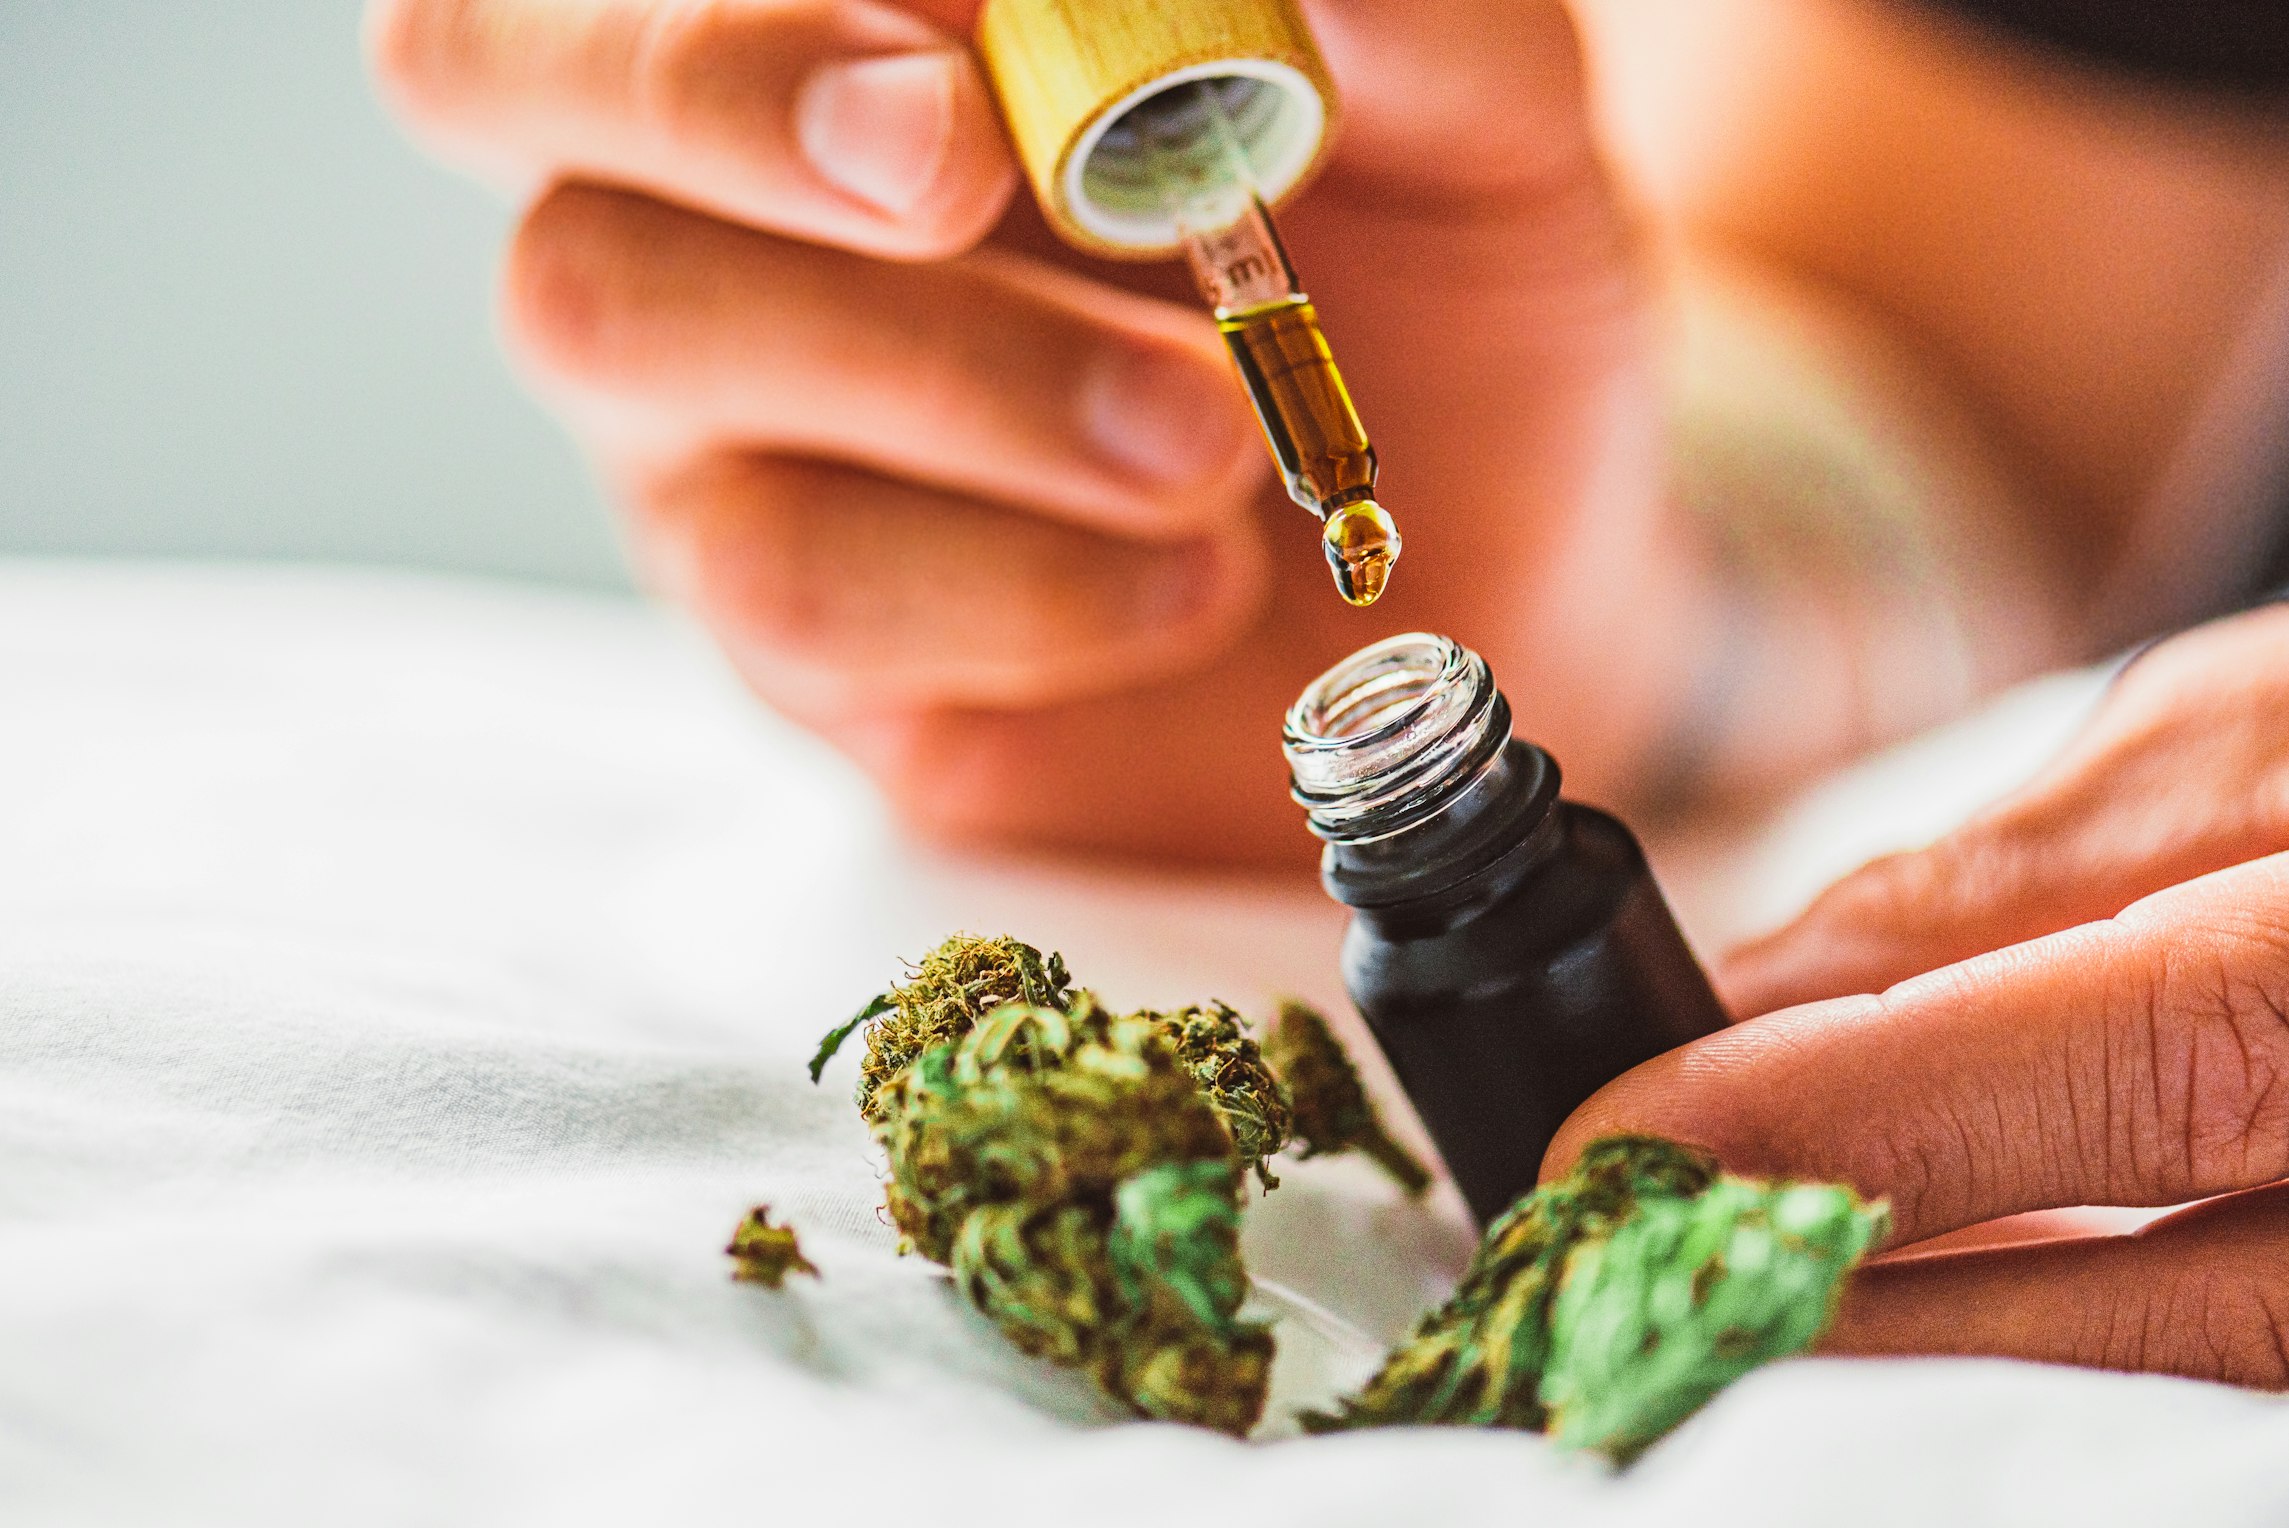 The therapeutic applications of CBD